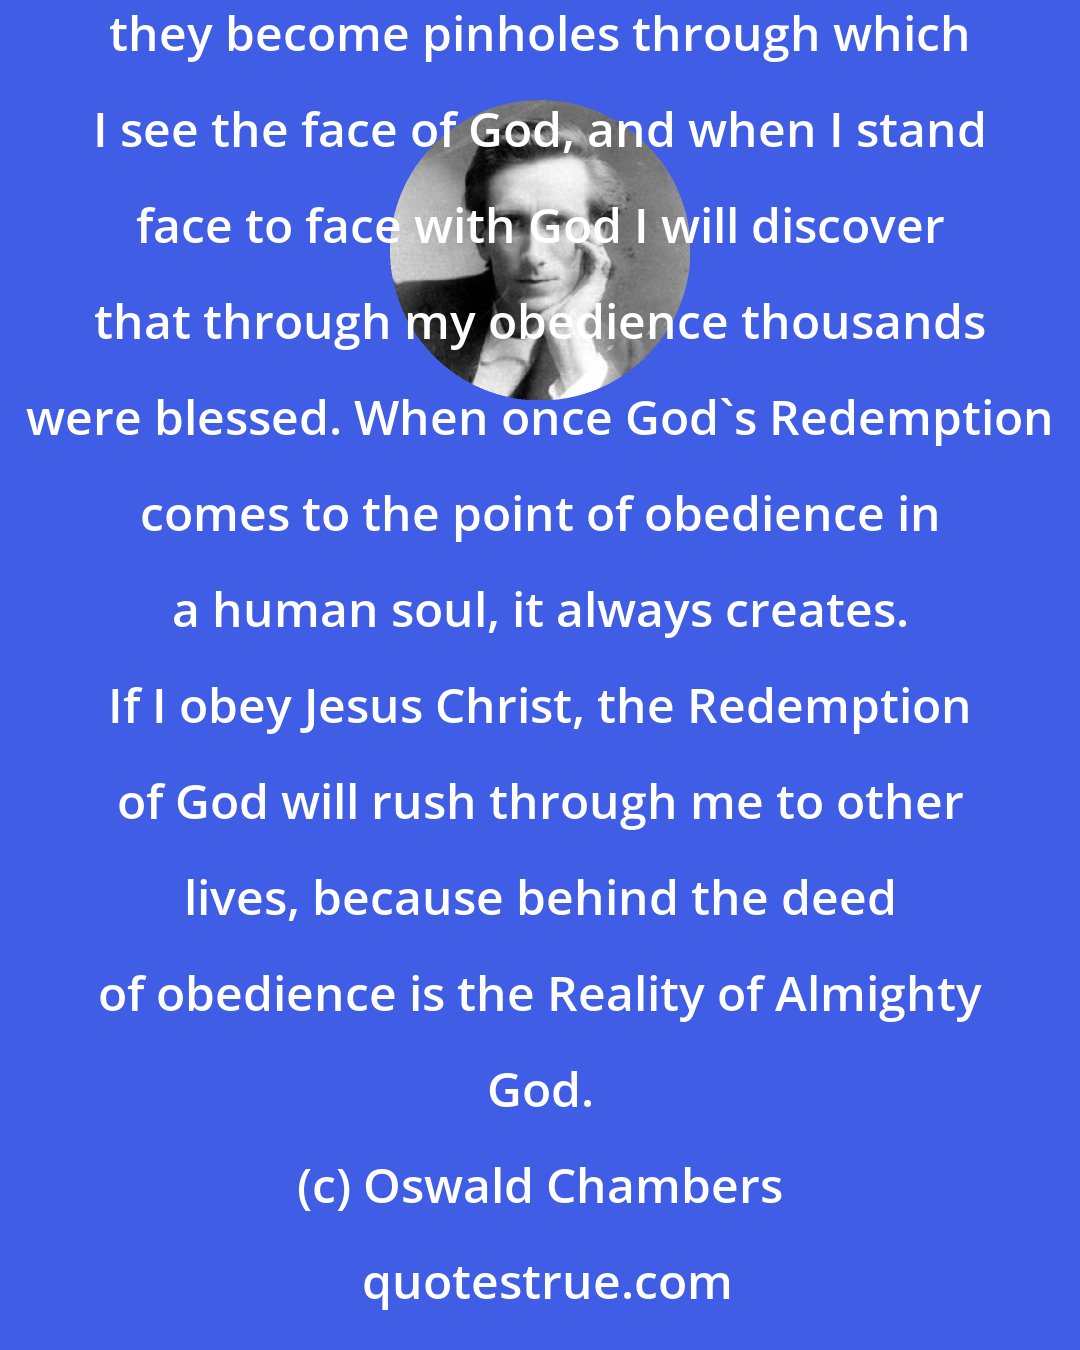 Oswald Chambers: My personal life may be crowded with small petty incidents, altogether unnoticeable and mean; but if I obey Jesus Christ in the haphazard circumstances, they become pinholes through which I see the face of God, and when I stand face to face with God I will discover that through my obedience thousands were blessed. When once God's Redemption comes to the point of obedience in a human soul, it always creates. If I obey Jesus Christ, the Redemption of God will rush through me to other lives, because behind the deed of obedience is the Reality of Almighty God.